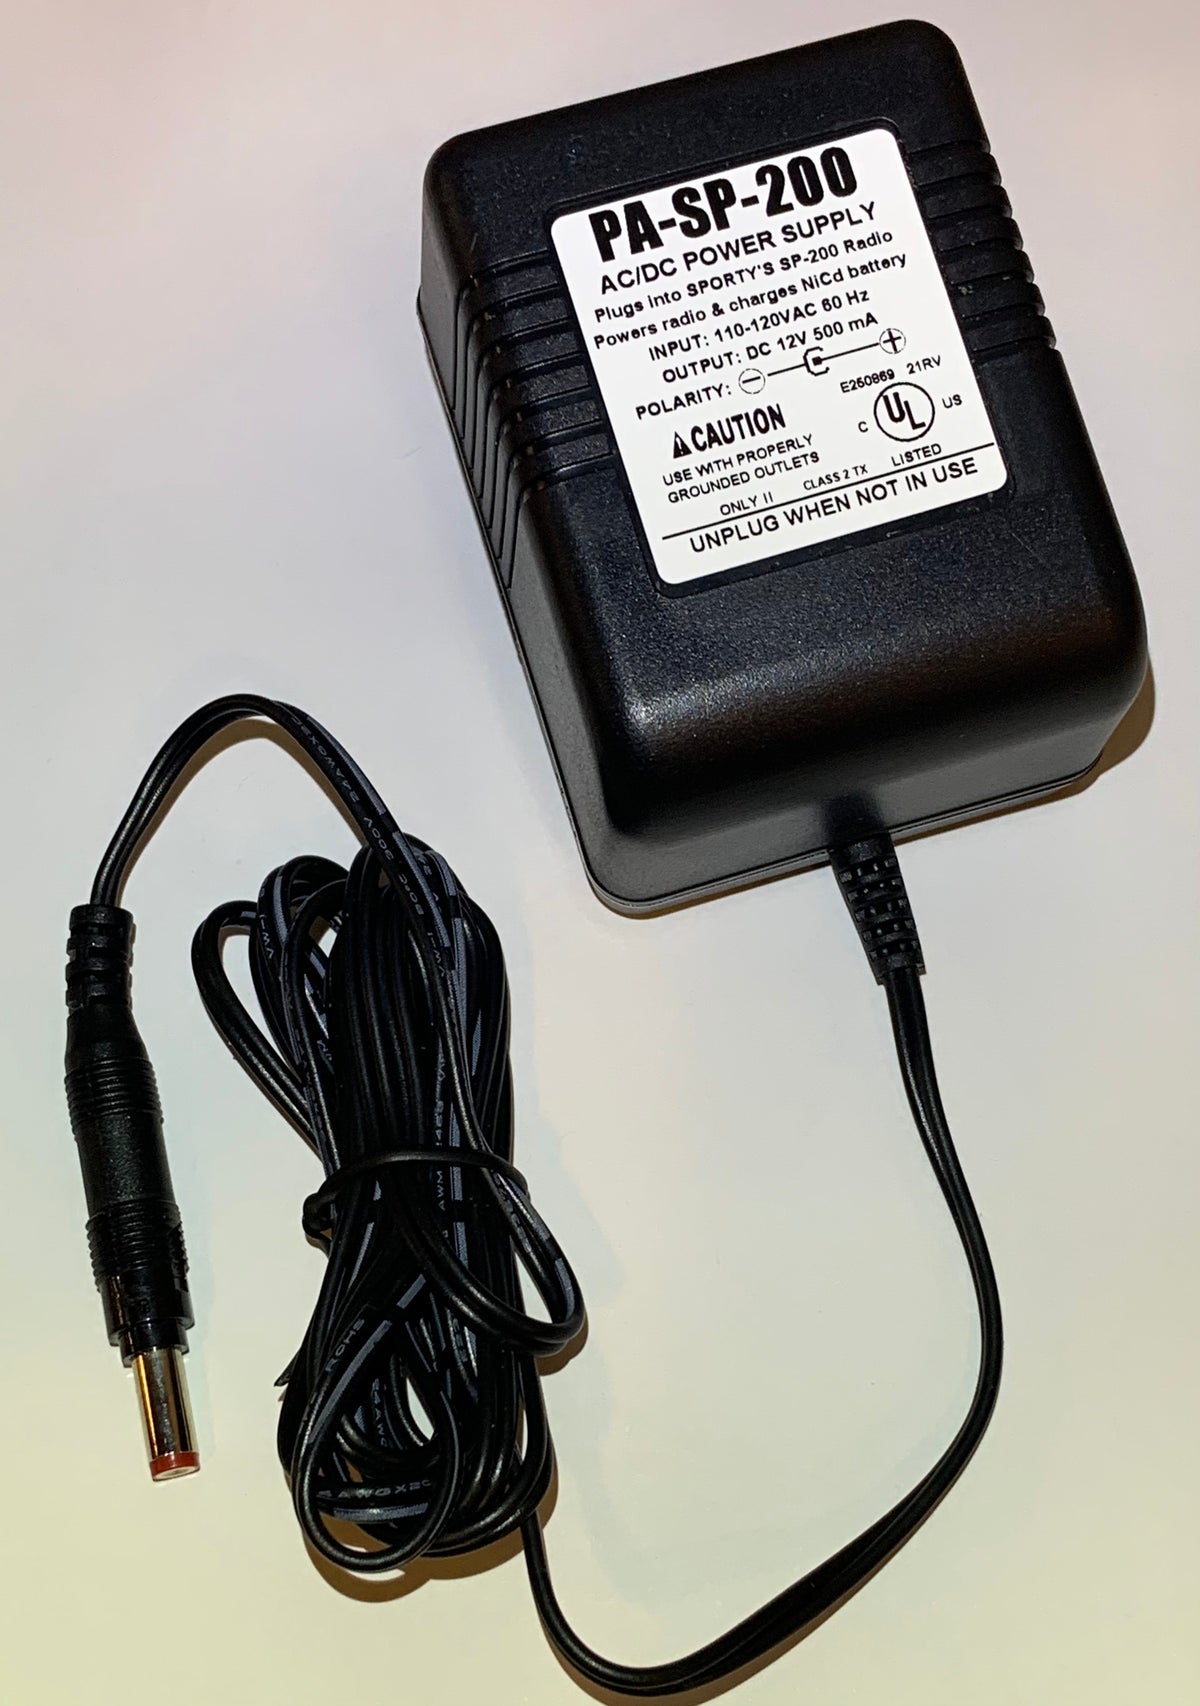 AC Power Adapter/Battery Charger (for Sporty's radios)